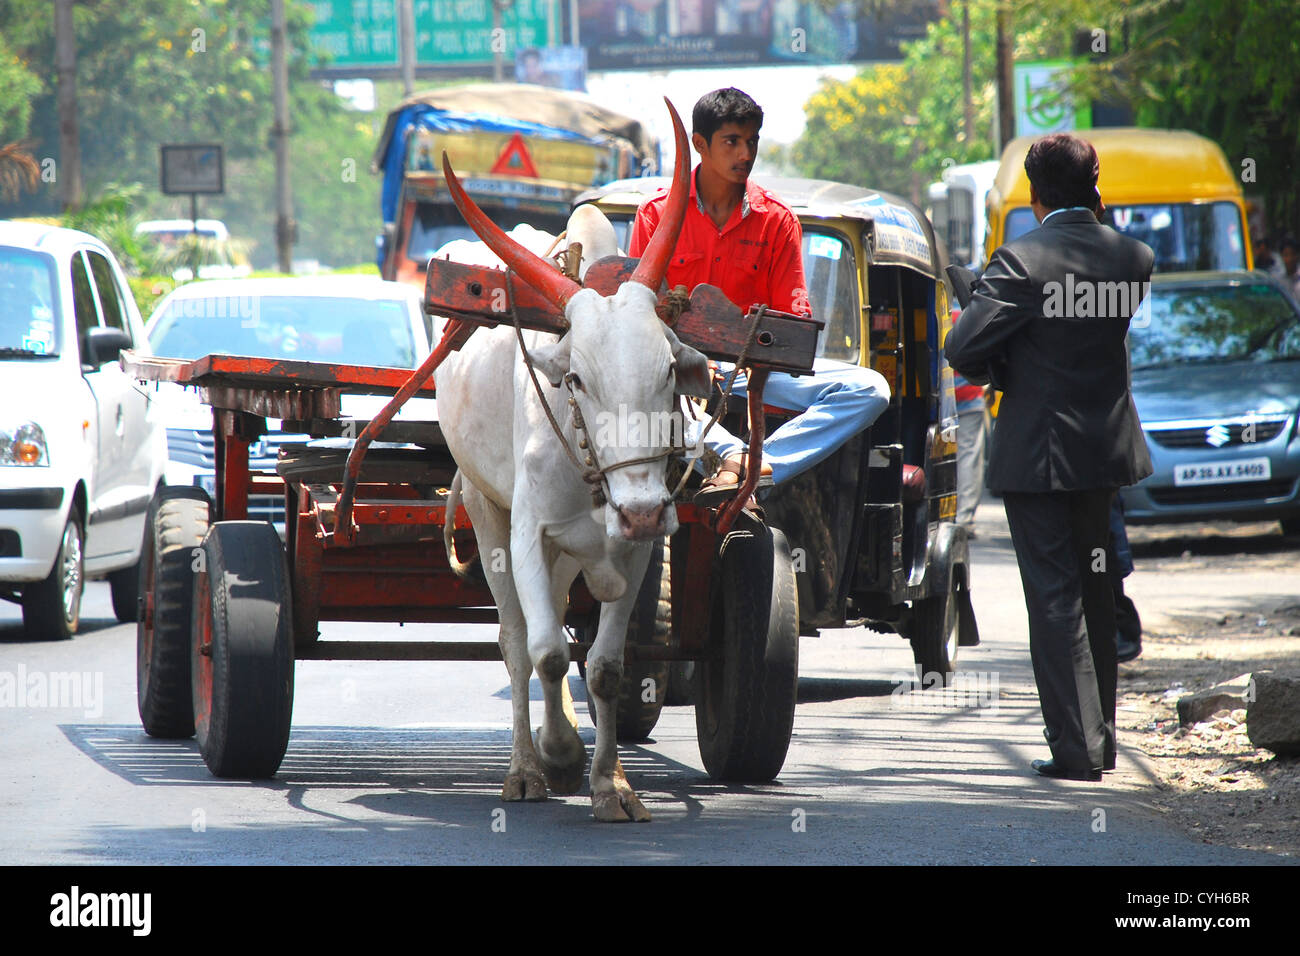 Street scene in the city of Pune (Poona), India. Oxen pulls a cart passed a suited man talking on cellphone Stock Photo